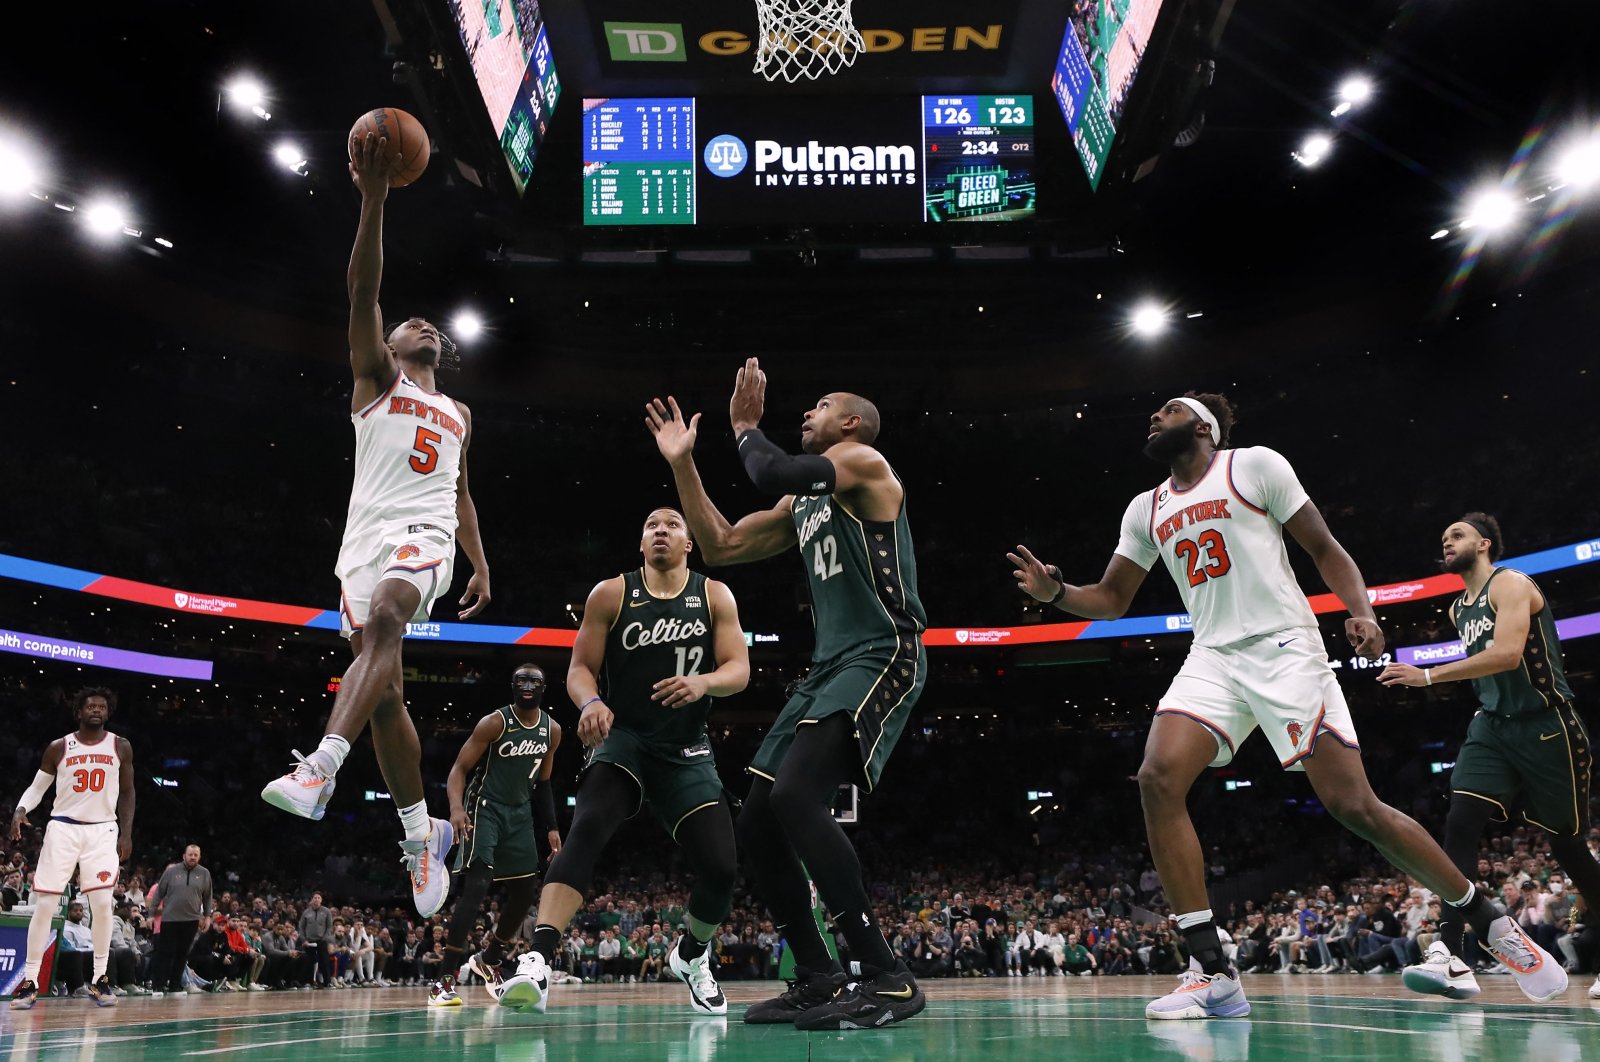 New York Knicks guard Immanuel Quickley (L) goes to the basket against the Boston Celtics during the overtime period at TD Garden, Boston, US., March 6, 2023. (Reuters Photo)